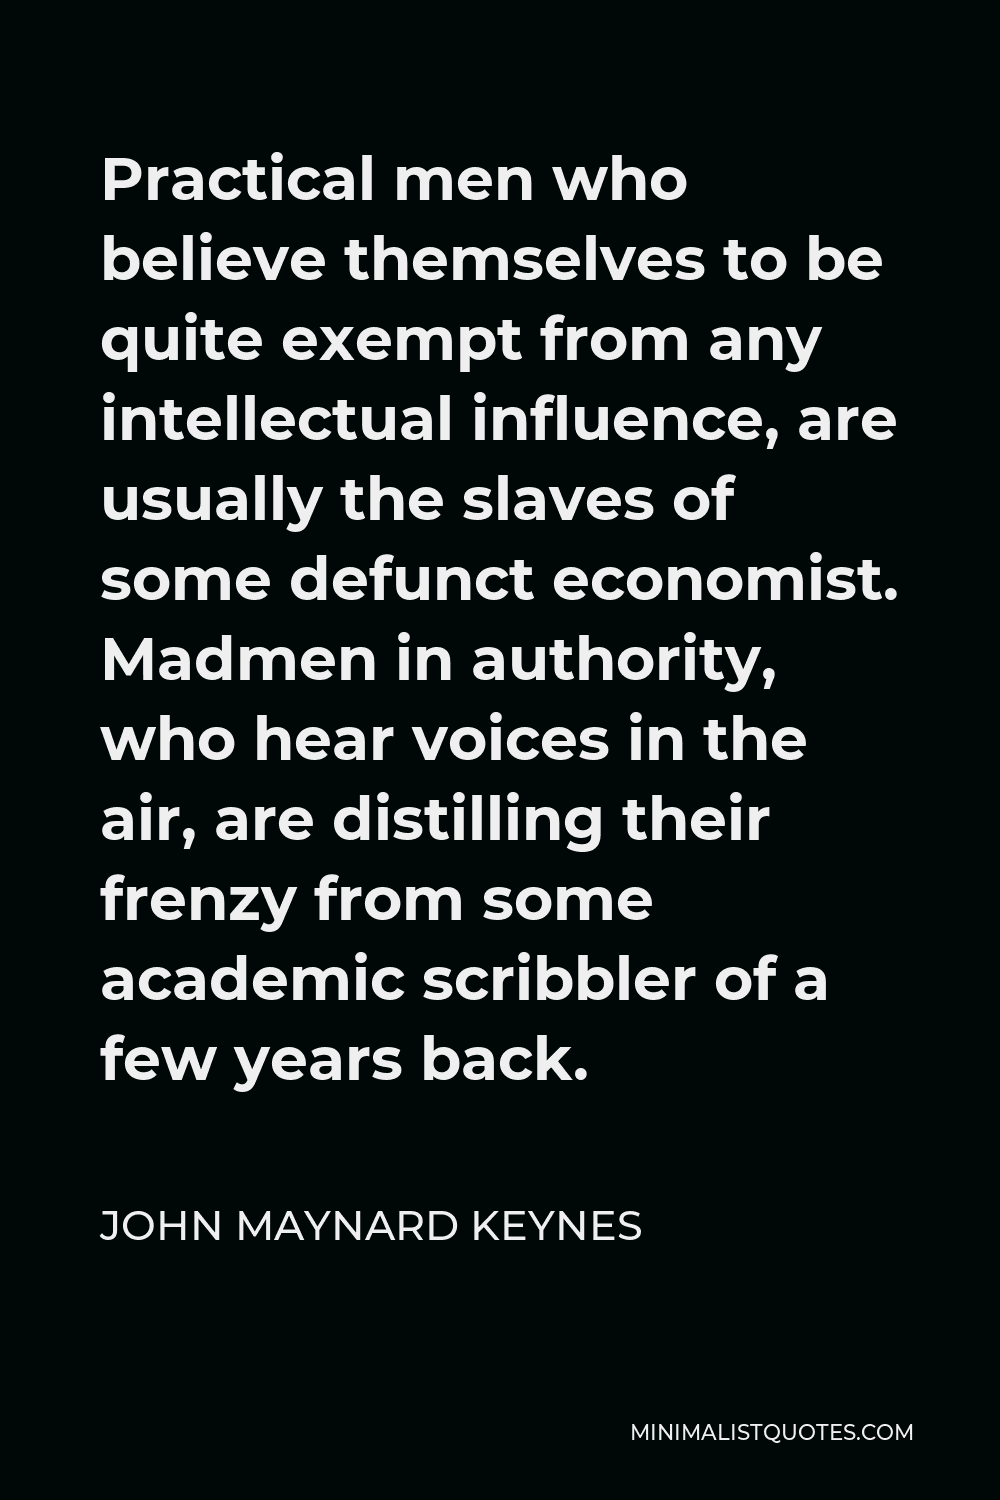 John Maynard Keynes Quote - Practical men who believe themselves to be quite exempt from any intellectual influence, are usually the slaves of some defunct economist. Madmen in authority, who hear voices in the air, are distilling their frenzy from some academic scribbler of a few years back.